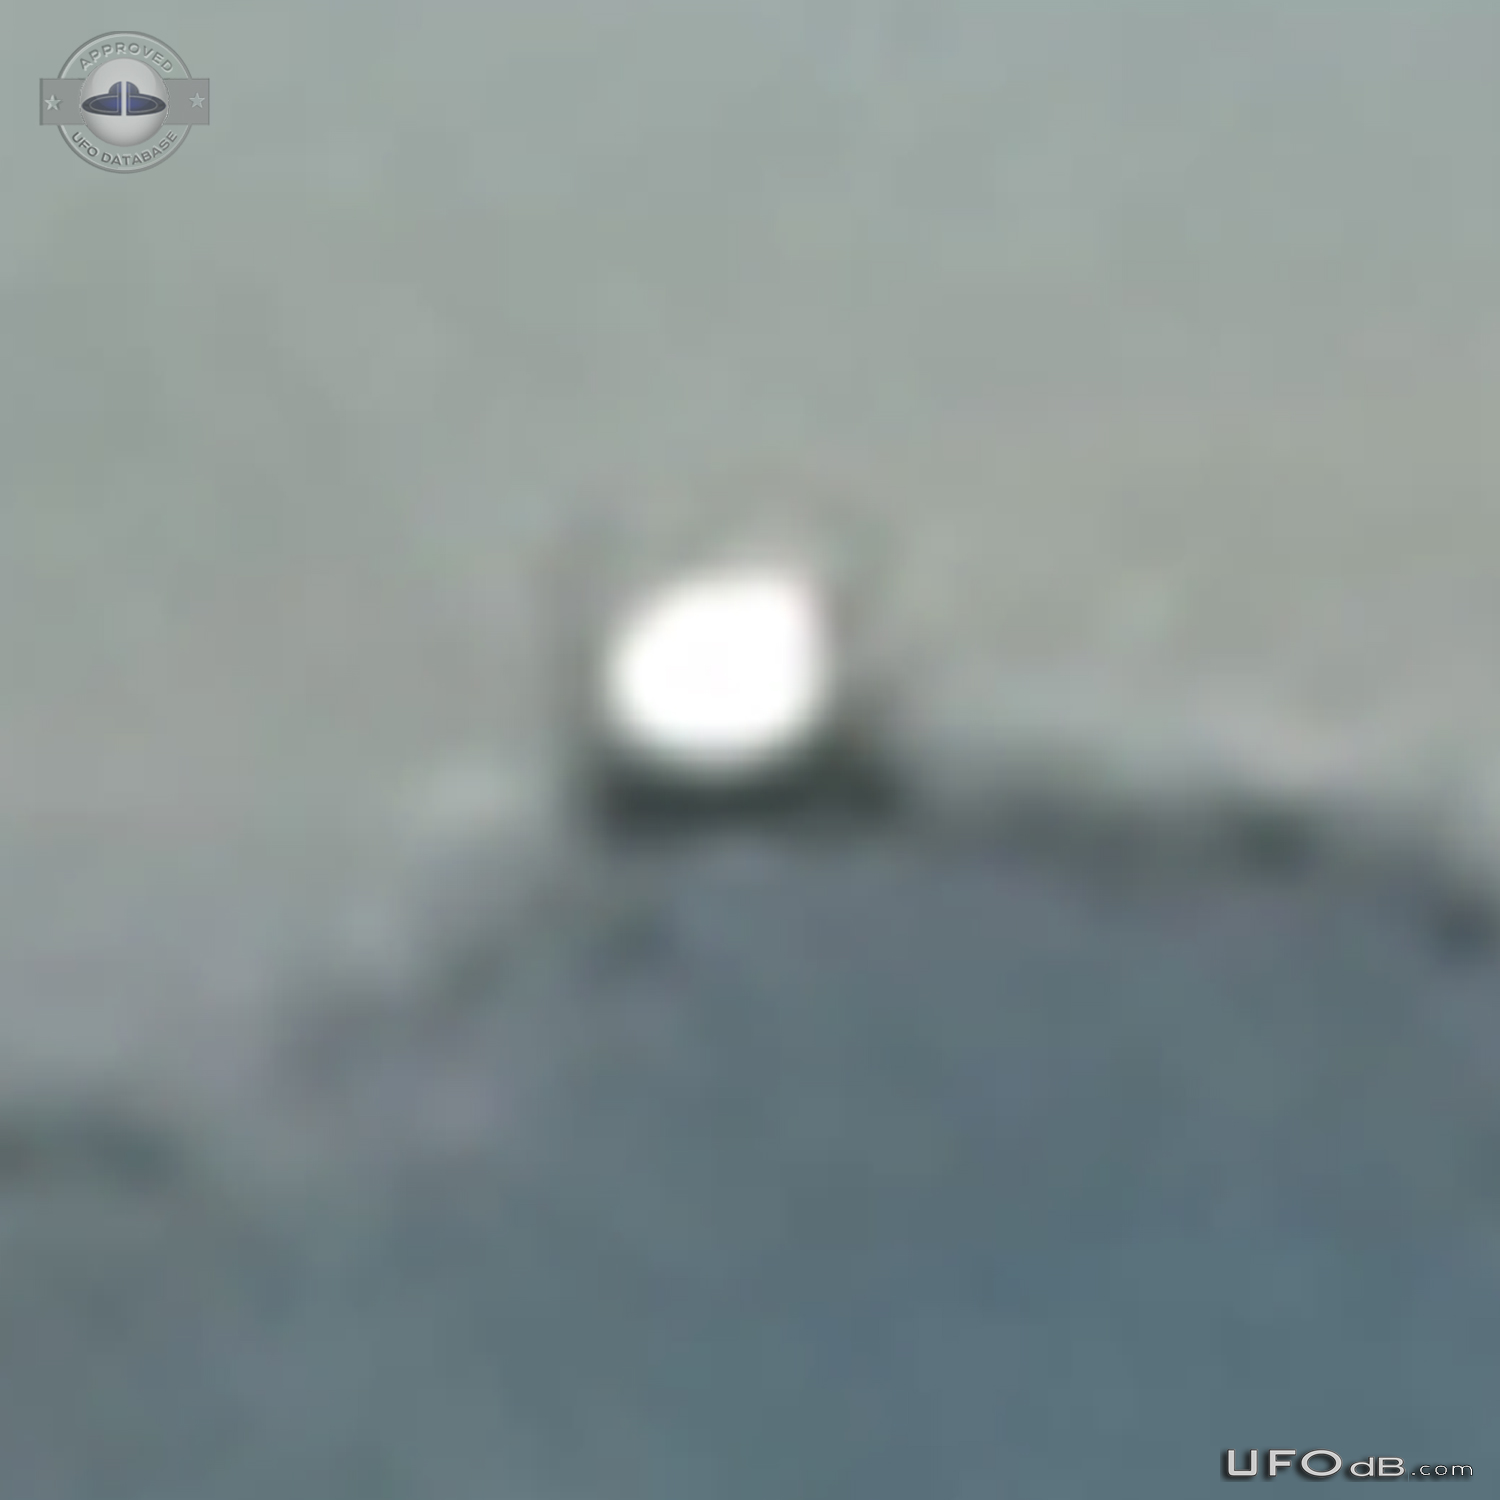 Looked to mountain. saw gigantic hovering ufo - Lake Stevens USA 2015 UFO Picture #703-6